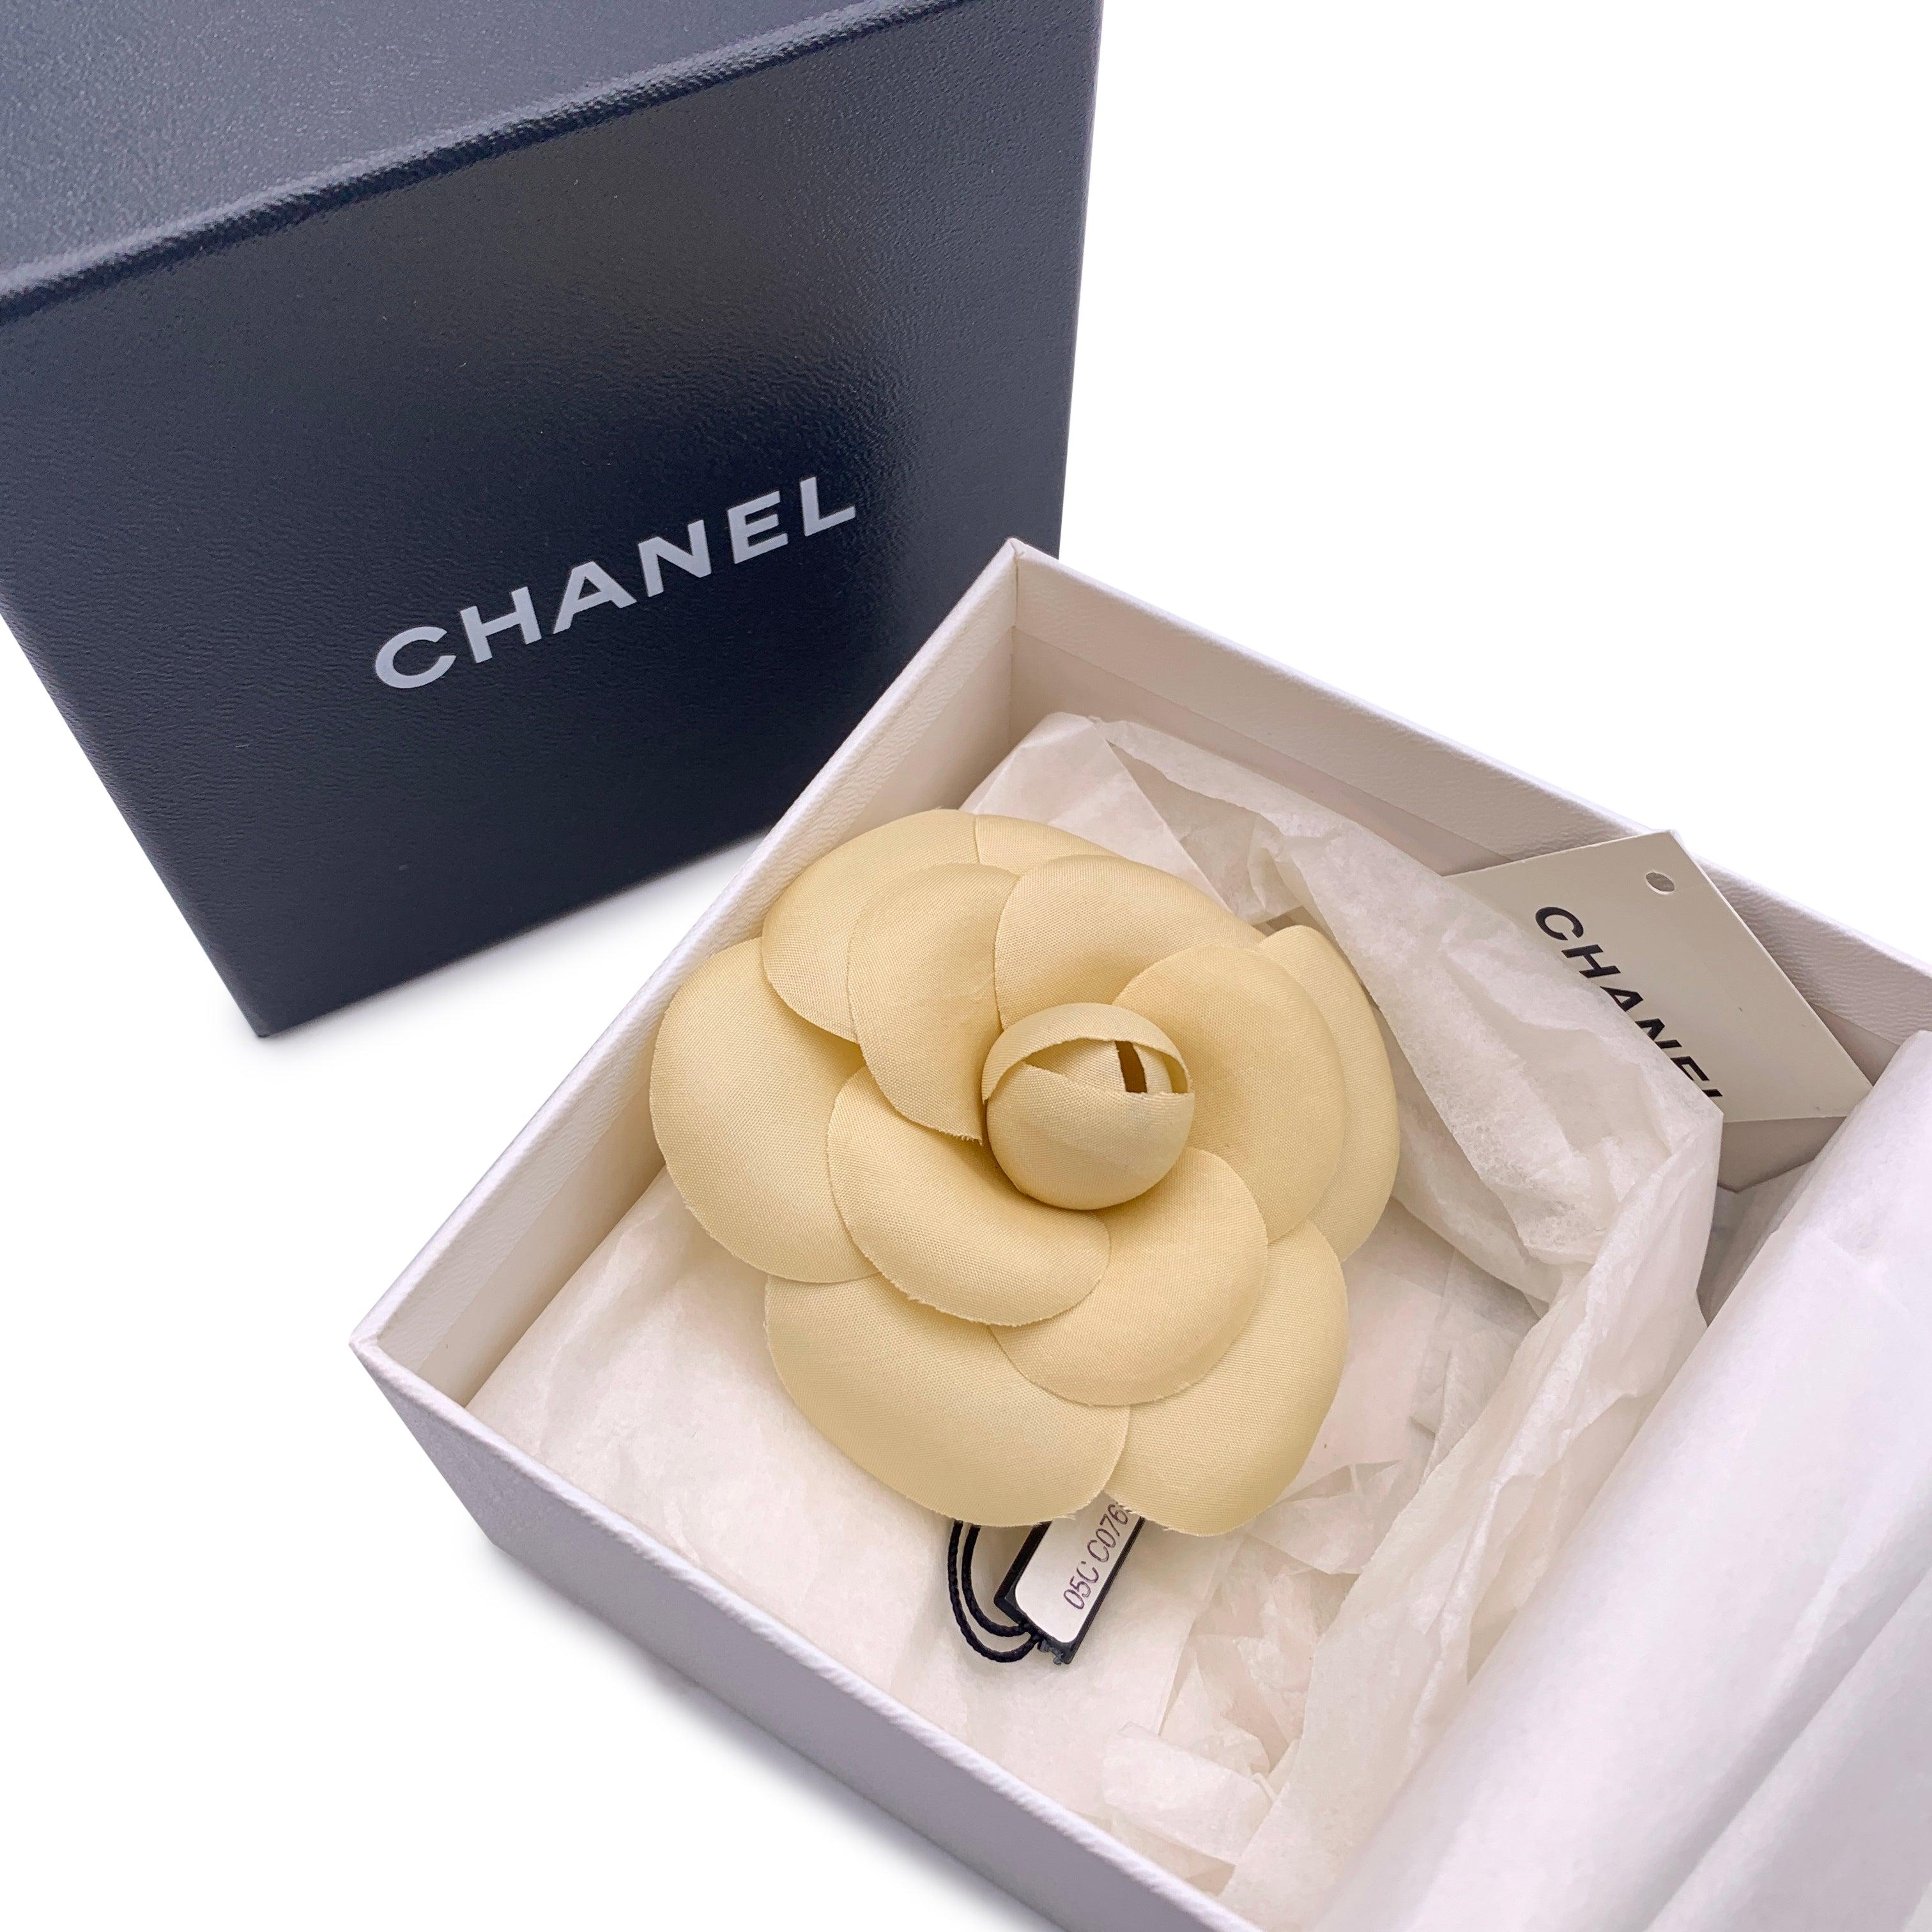 Chanel Vintage Camelia Camellia Flower Pin Brooch. Beige fabric petals. Safety pin closure. Measurements: diameter: 3.5 inches - 8.9 cm. 'CHANEL - CC - Made in France' oval tab on the back Condition A - EXCELLENT Gently used. Chanel box included.